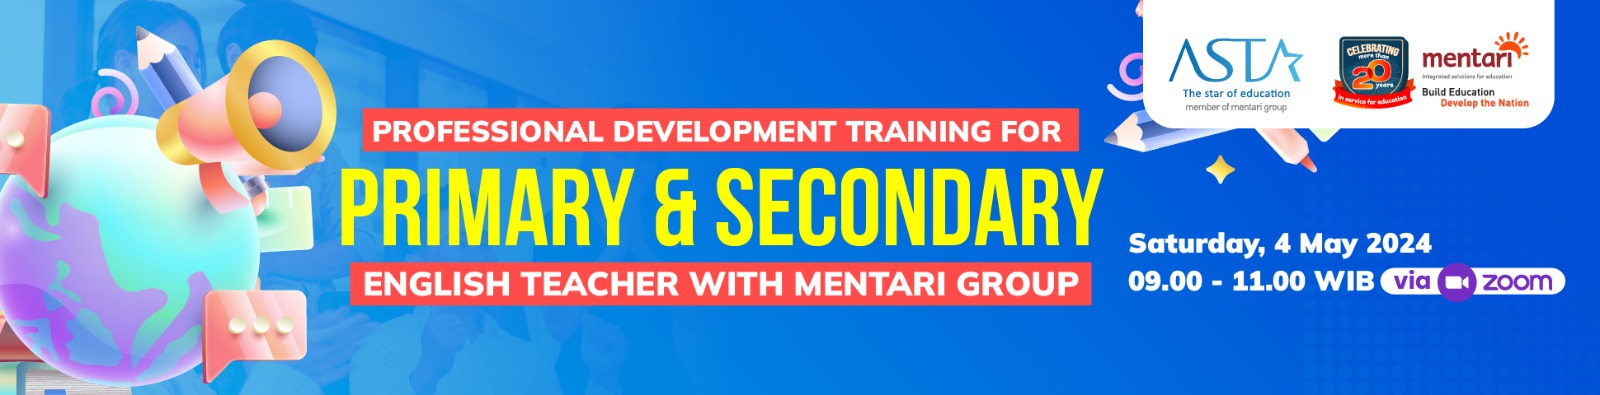 Professional Development Training for Primary and Secondary English Teacher With Mentari Group 2024